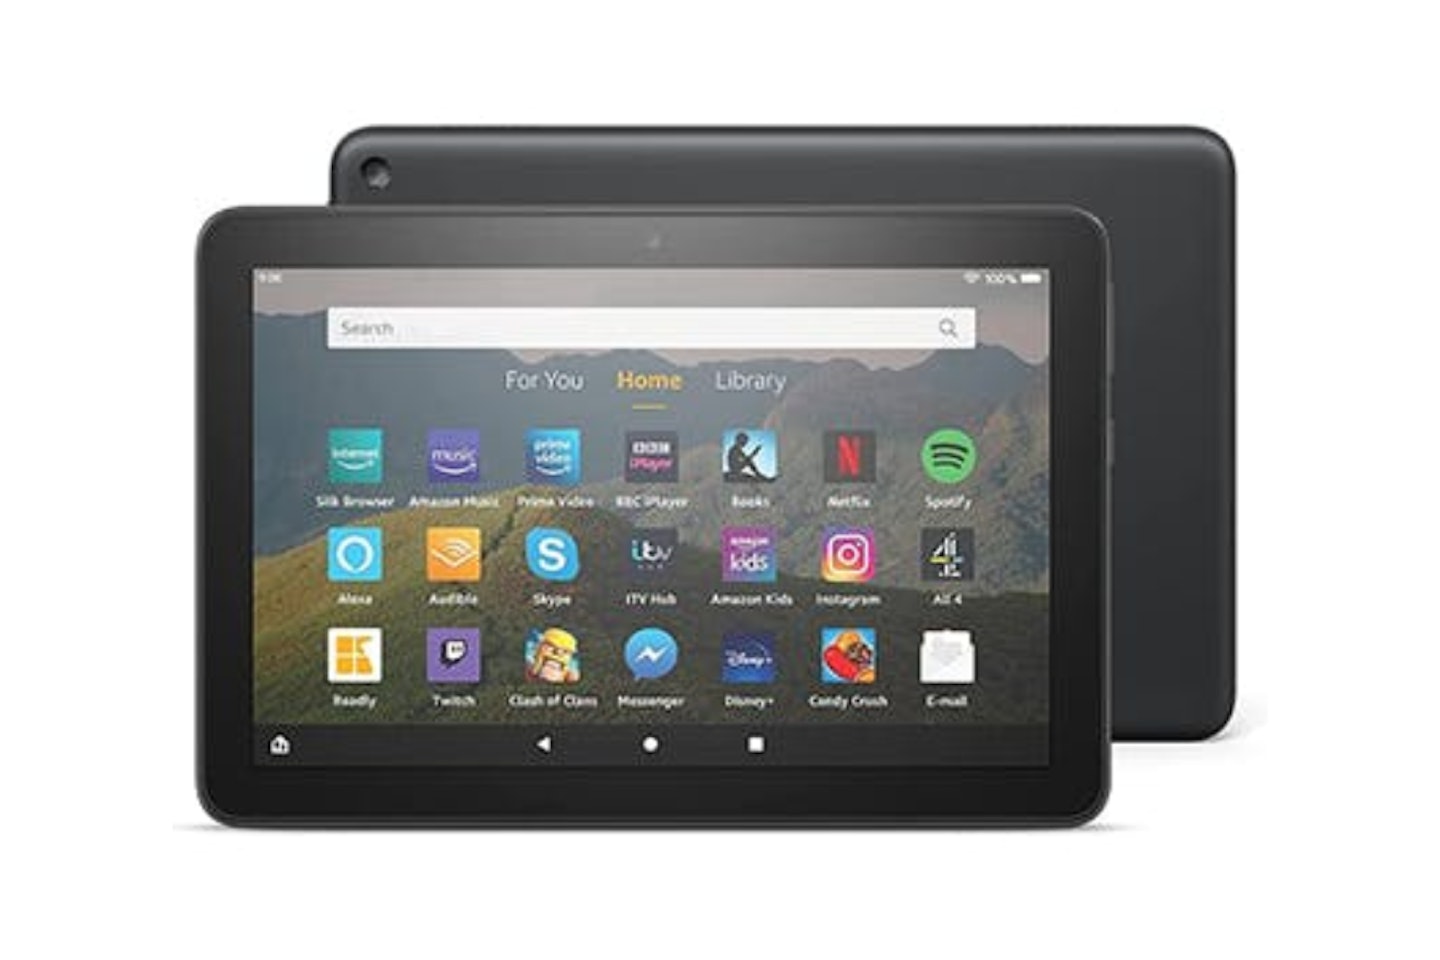 Amazon Fire HD 8- one of the best Android tablets